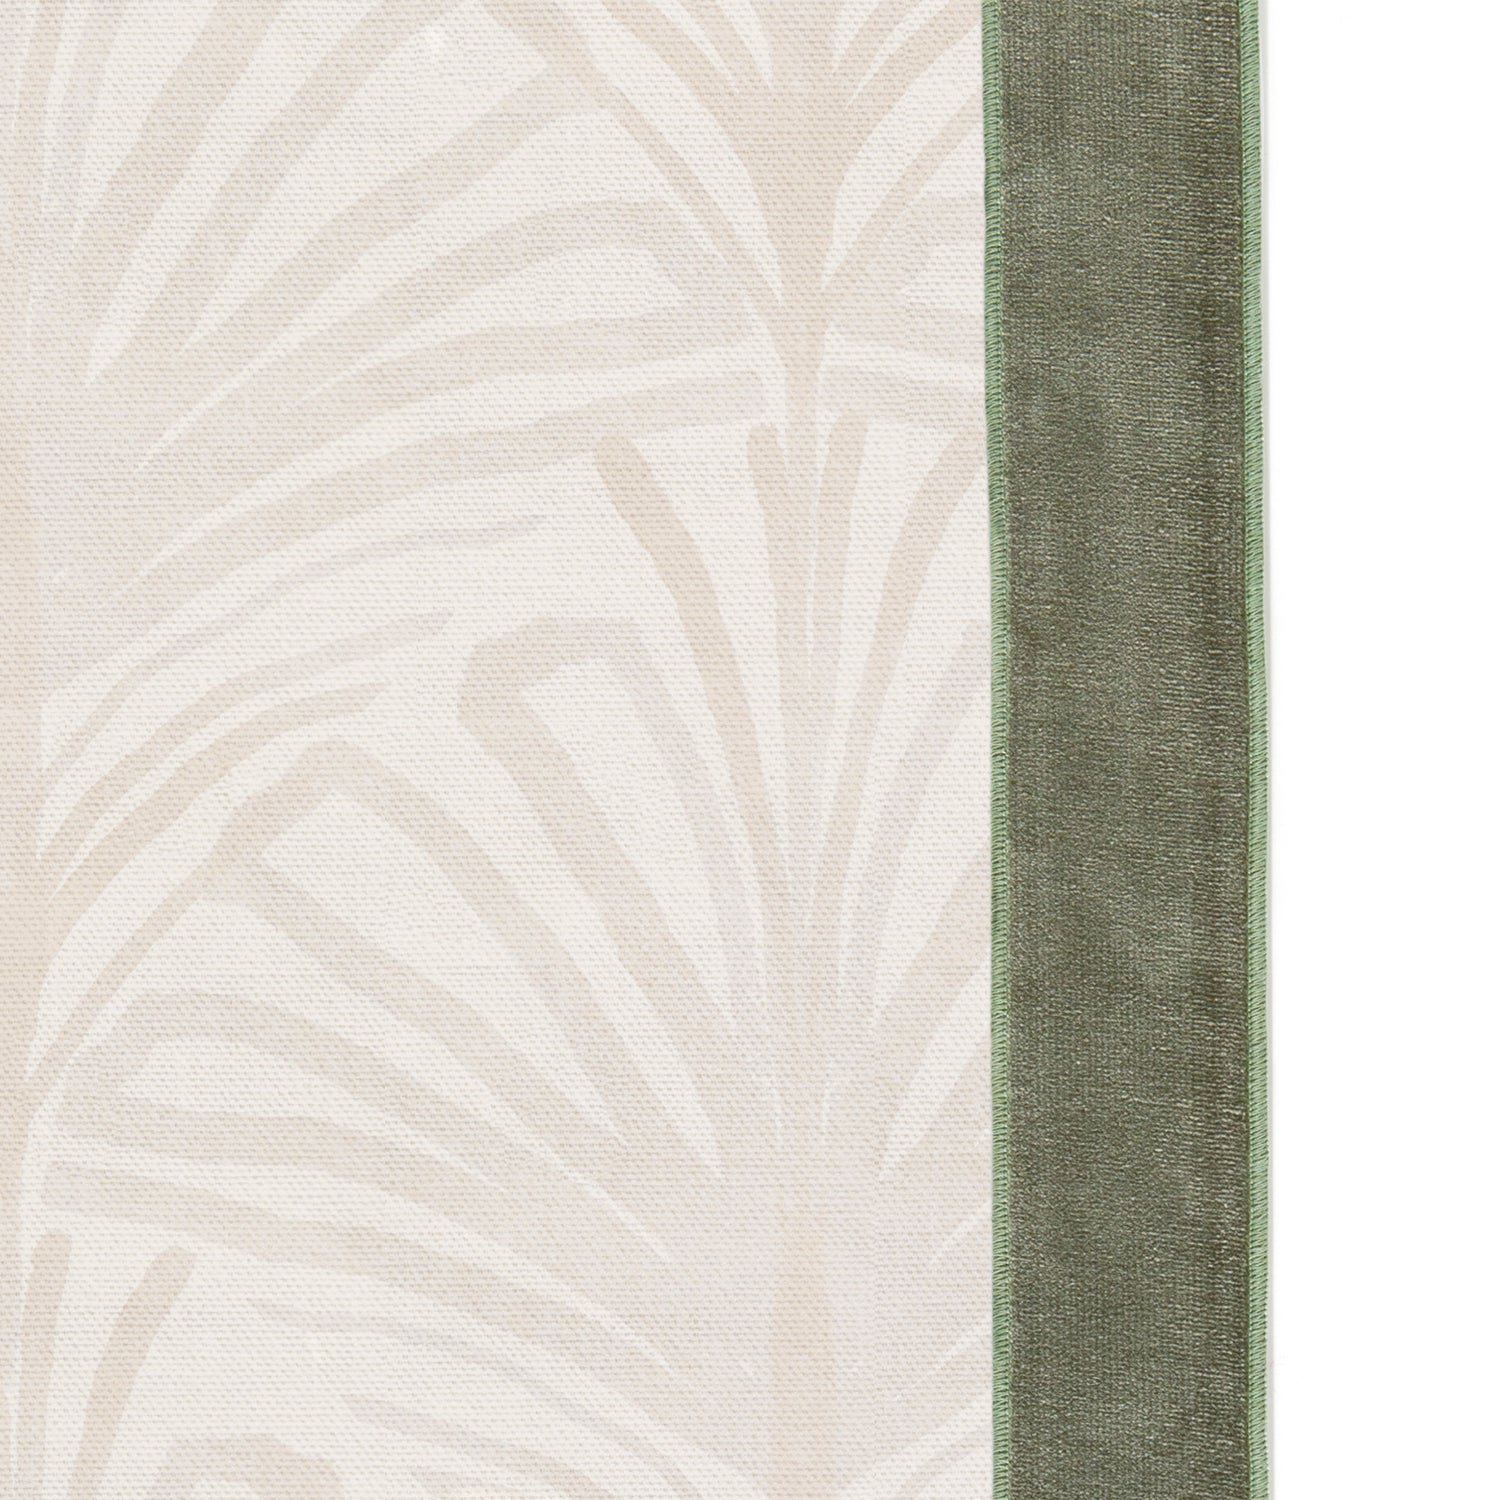 Upclose picture of Suzy Sand custom Beige Palmshower curtain with fern velvet band trim